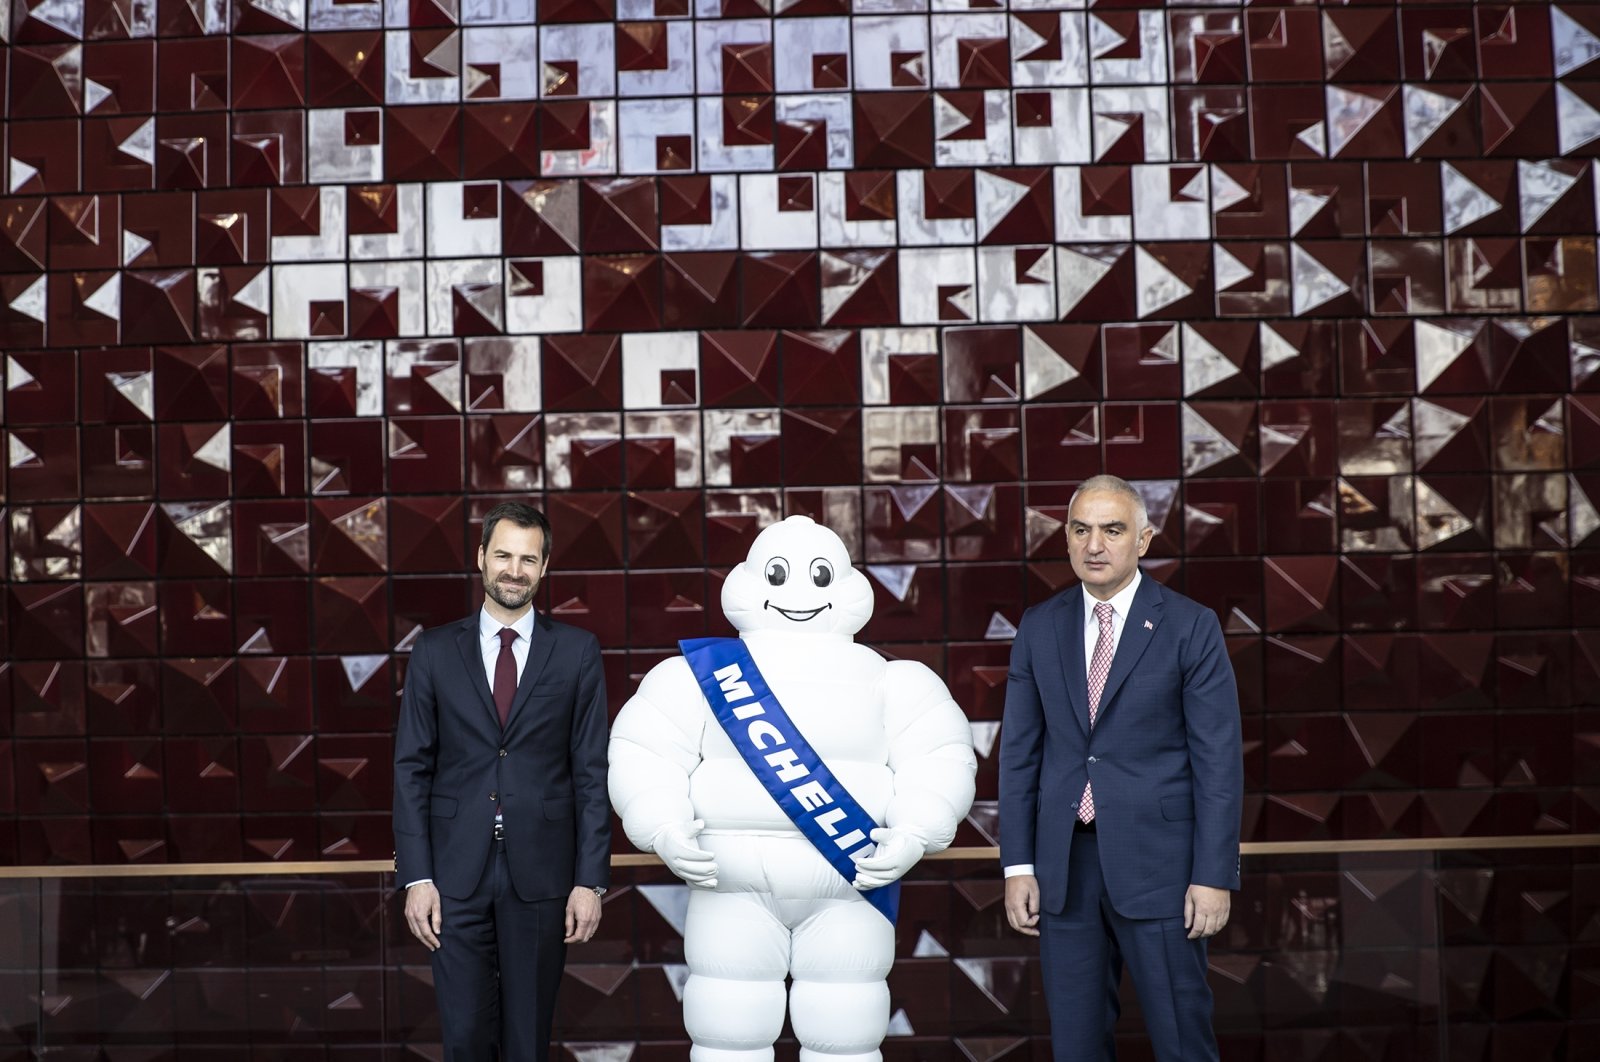 Gwendal Poullennec (L), International Director of Michelin Guides, and Mehmet Nuri Ersoy (R), Minister of Culture and Tourism, pose for a photo together with the Michelin mascot, in Istanbul, Turkey, April 21, 2022. (AA Photo)